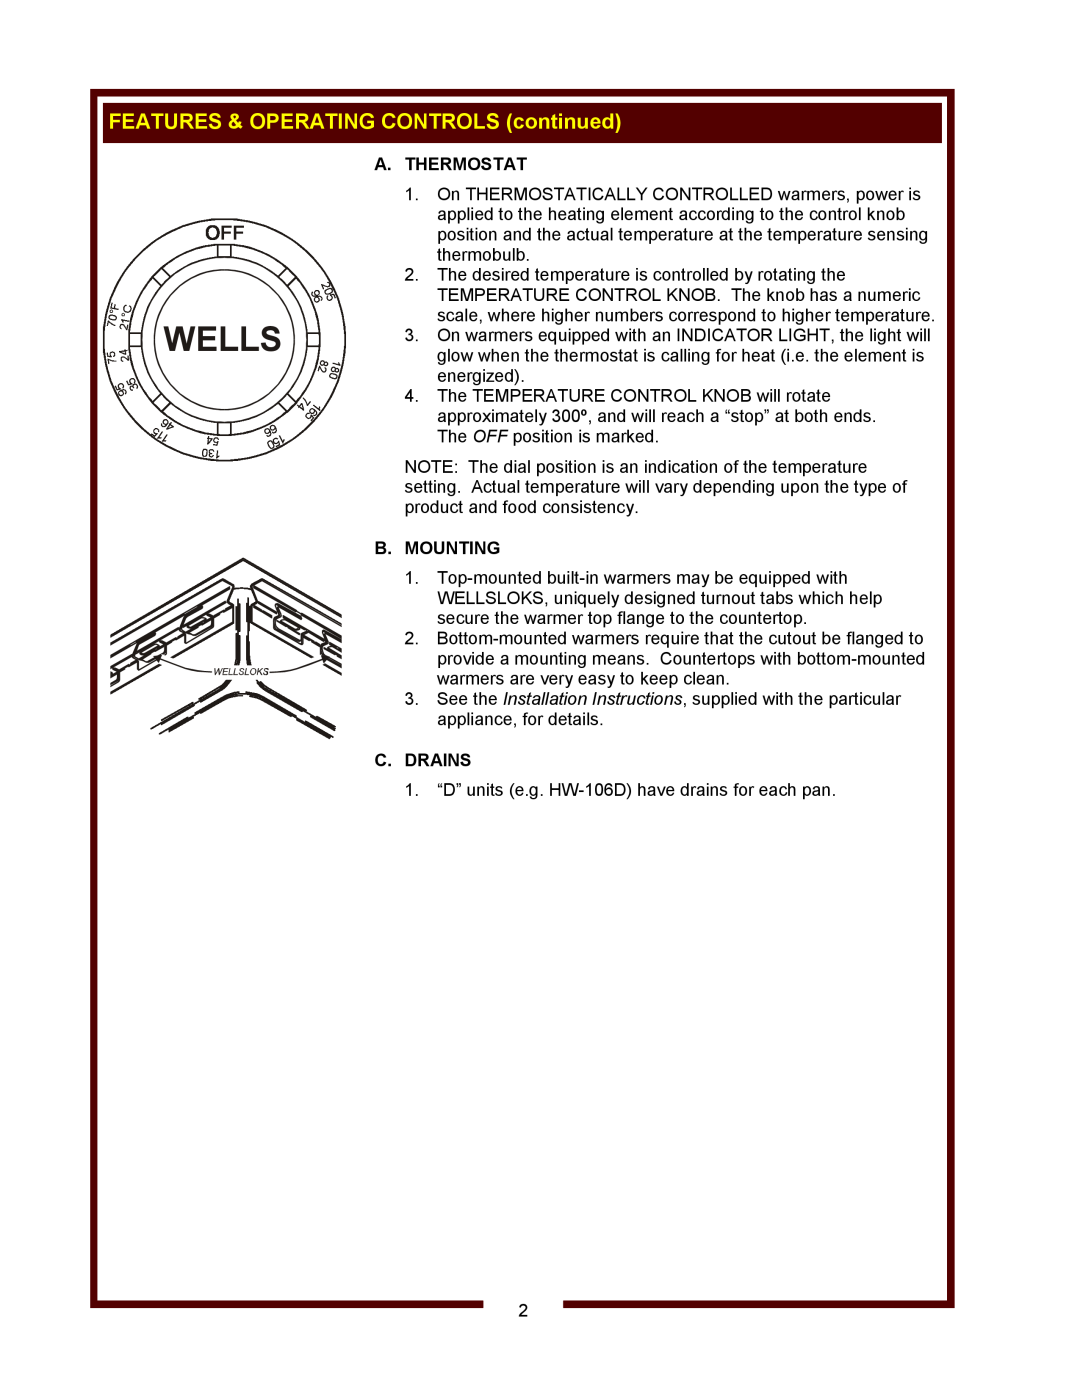 Wells HW-106D, HW/SMP-6D FEATURES & OPERATING CONTROLS continued, Wells, A. Thermostat, B. Mounting, C. Drains 